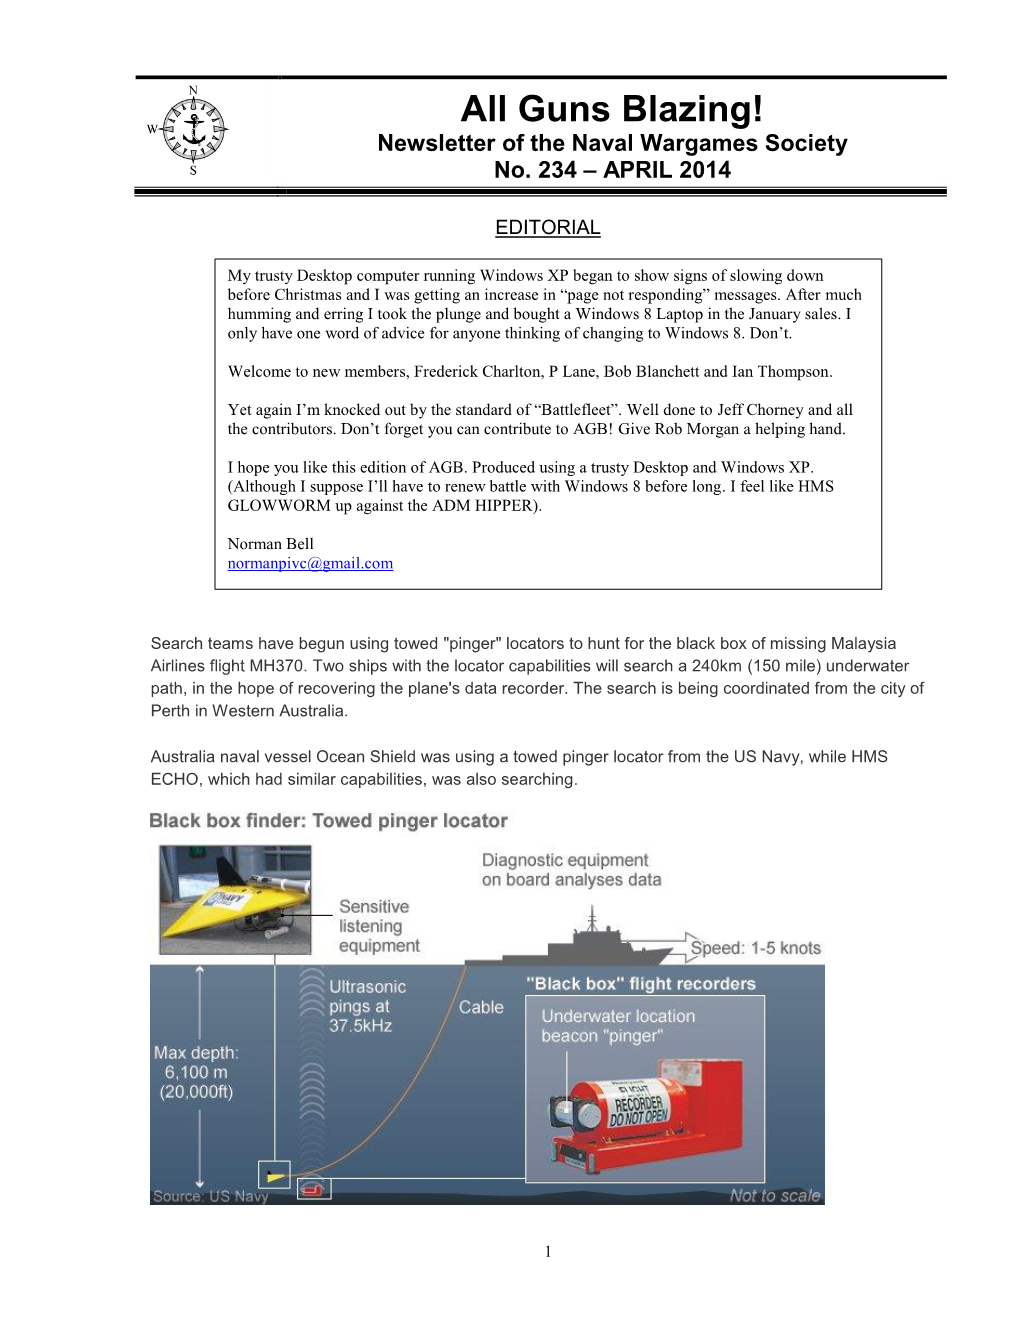 All Guns Blazing! Newsletter of the Naval Wargames Society No